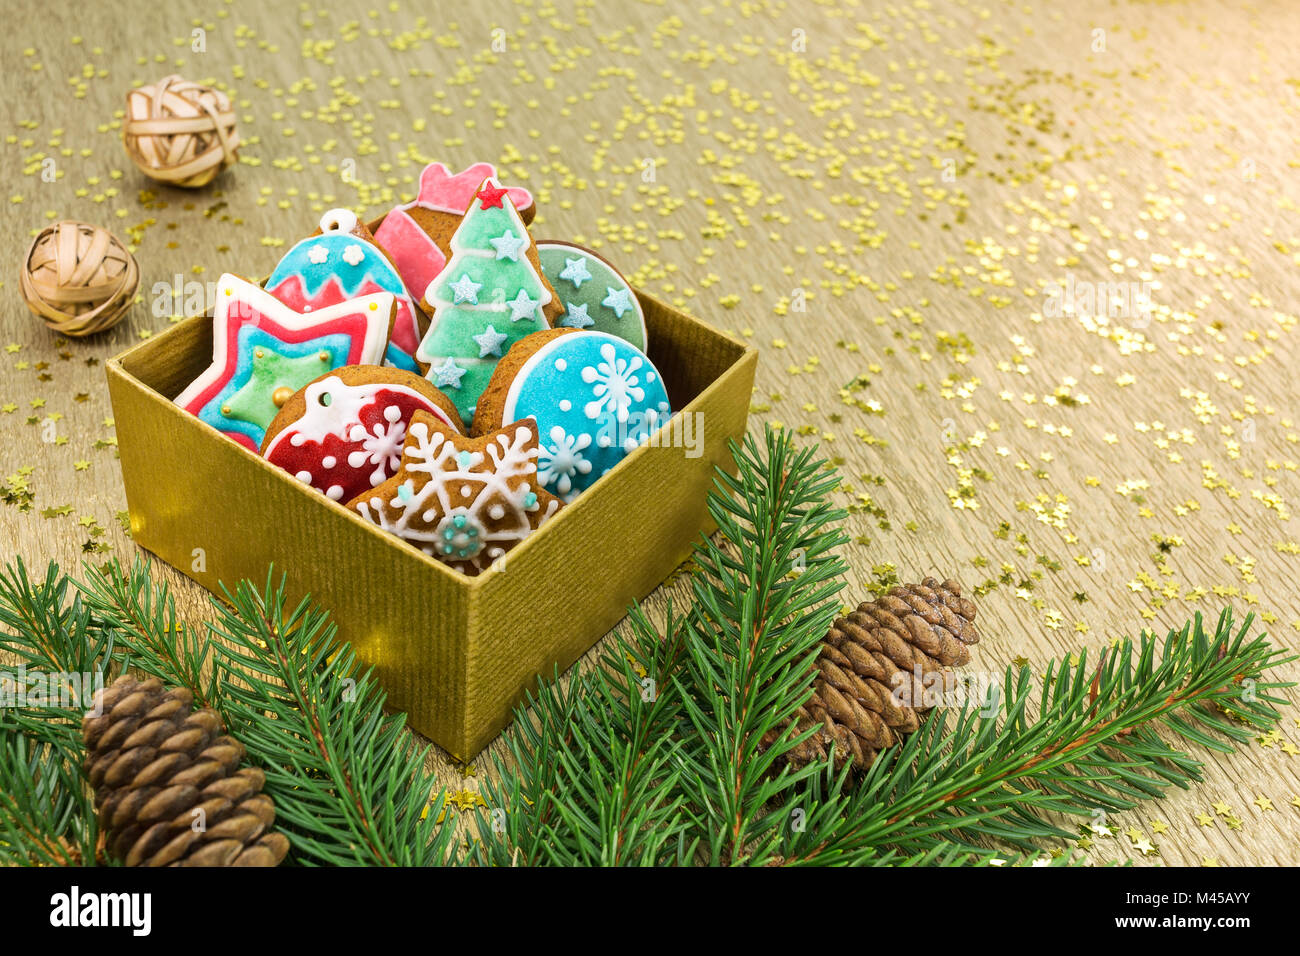 colorful cookies in gift box Stock Photo